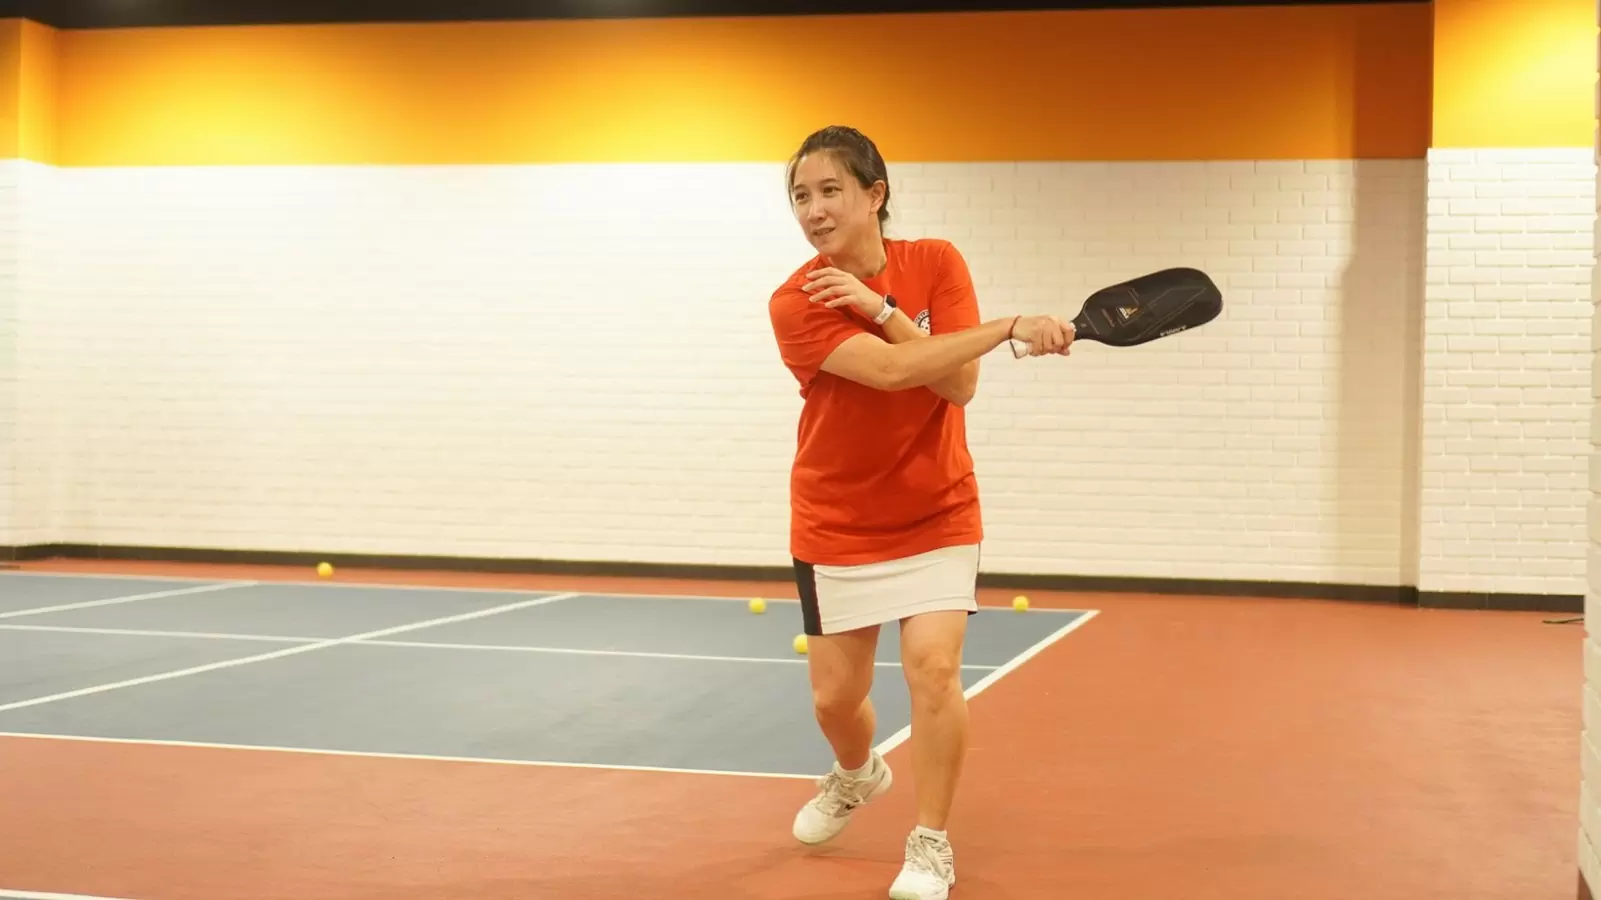  Pickleball Vs Tennis Know The Differences Between These Two!